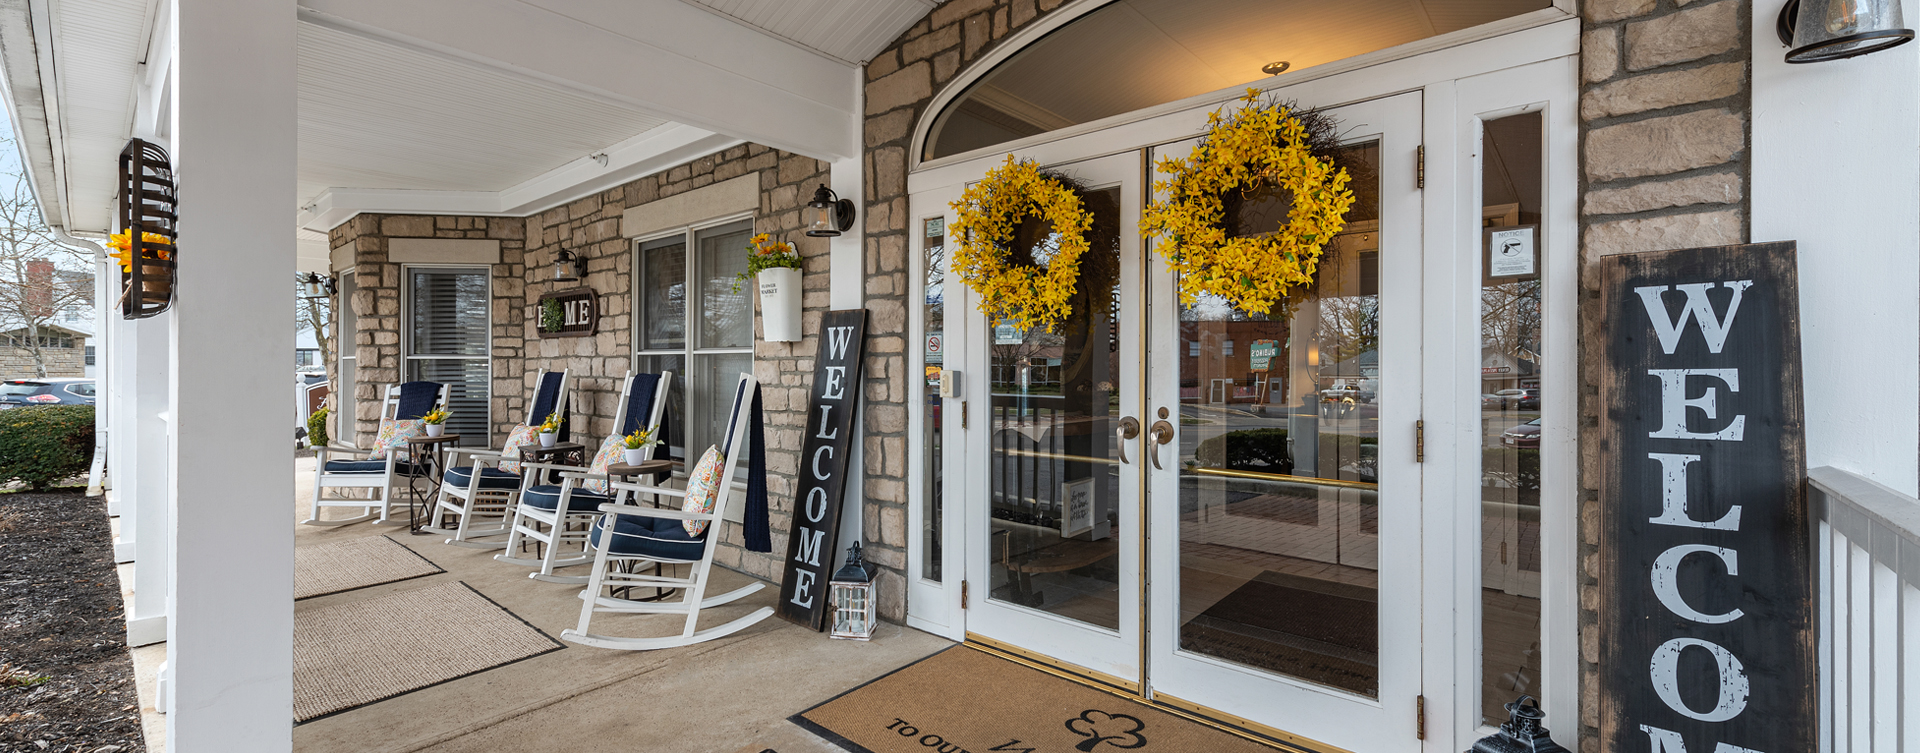 Relax in your favorite chair on the porch at Bickford of Bexley